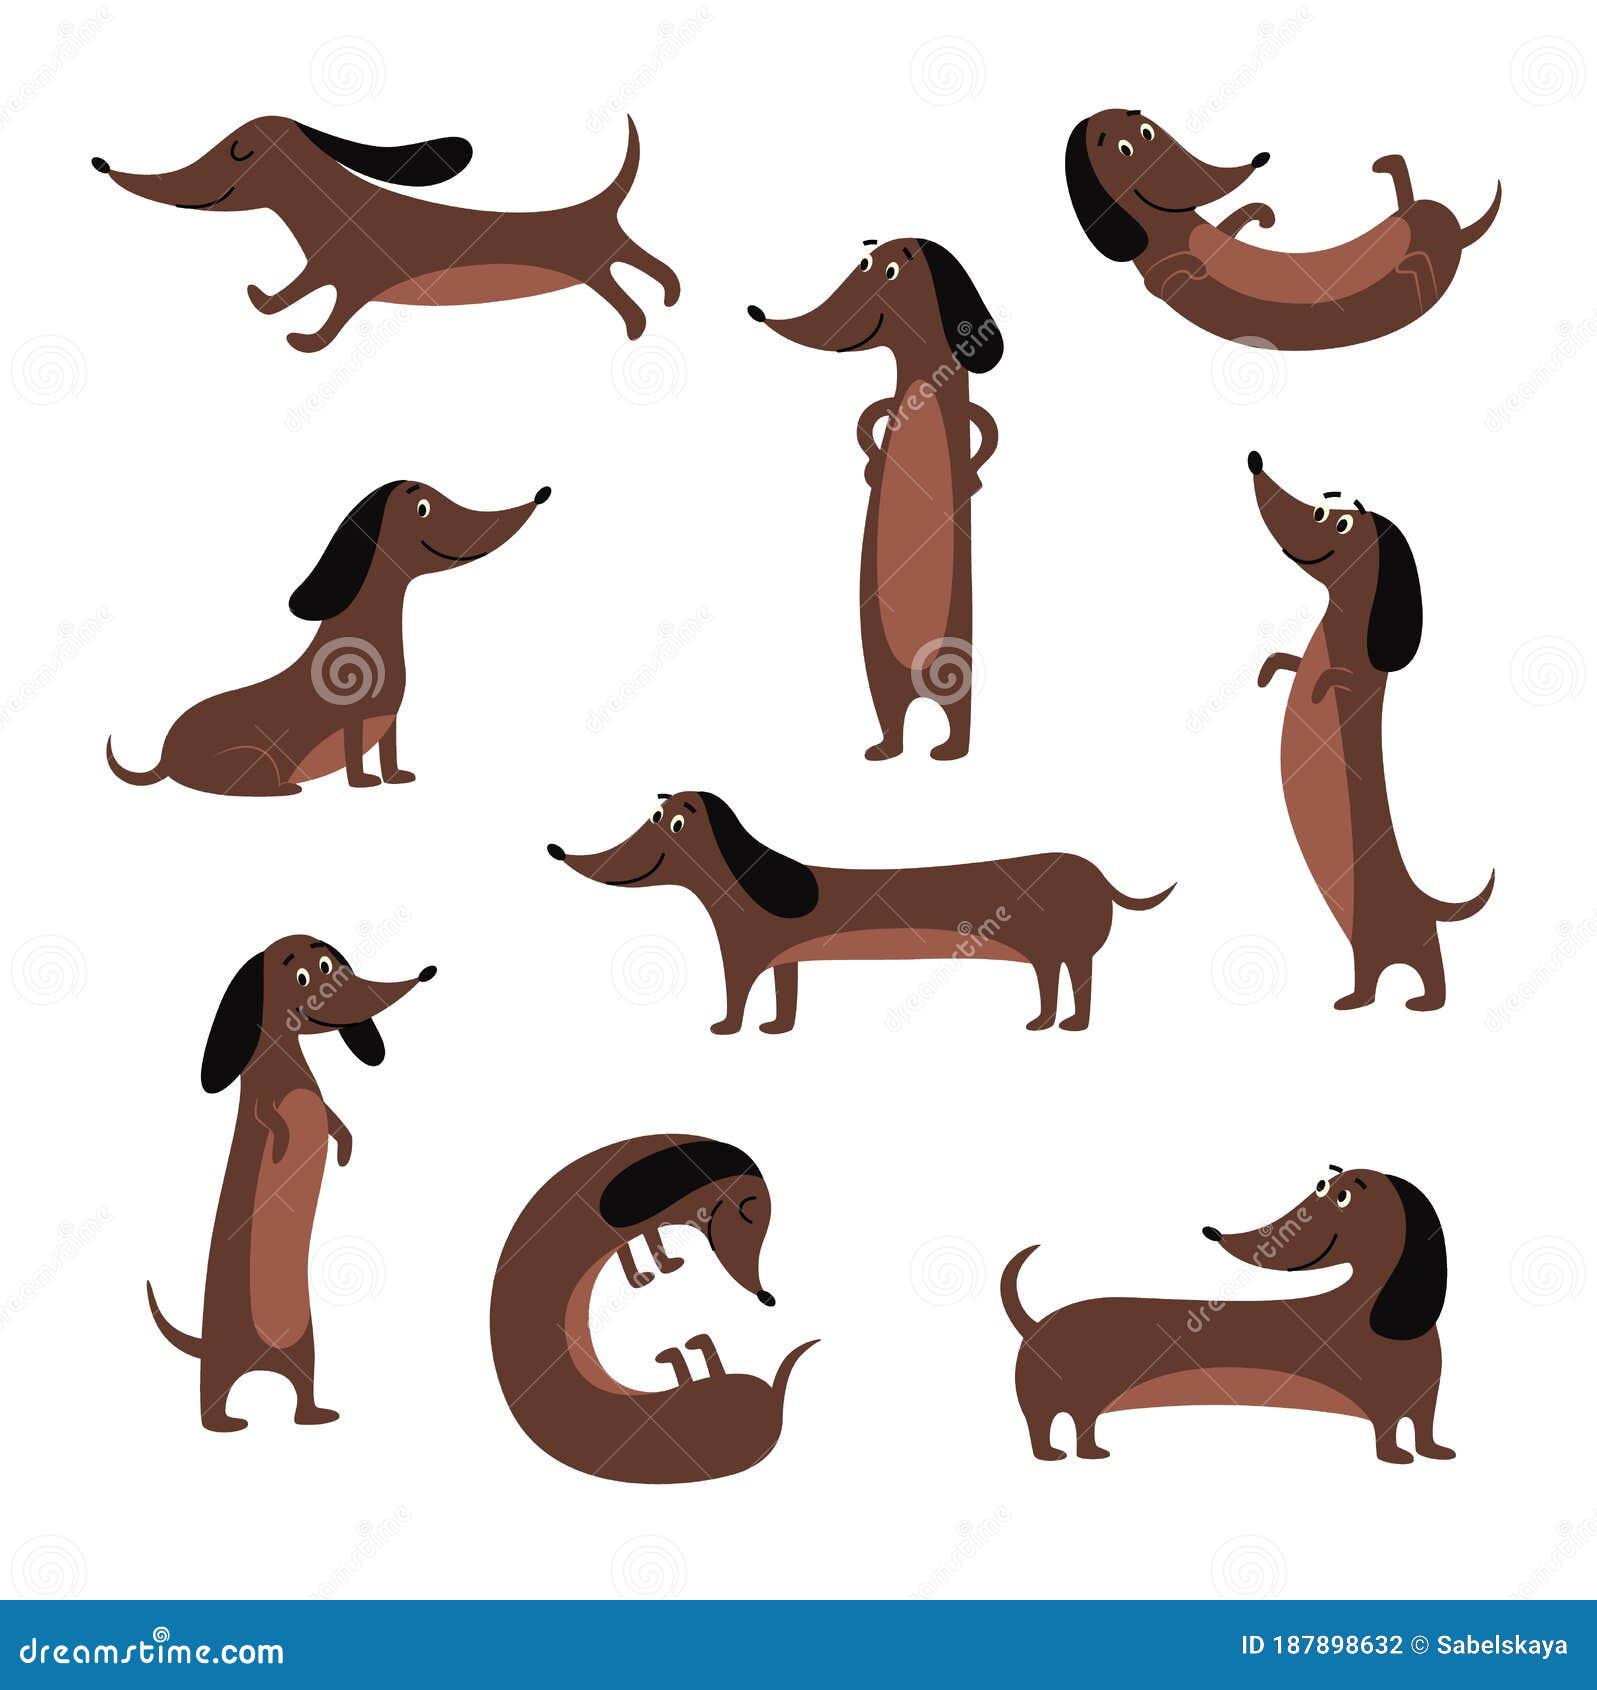 Cute Dachshund Dog Isolated Set - Cartoon Pet Sitting, Standing and Lying  Stock Vector - Illustration of brown, doggy: 187898632